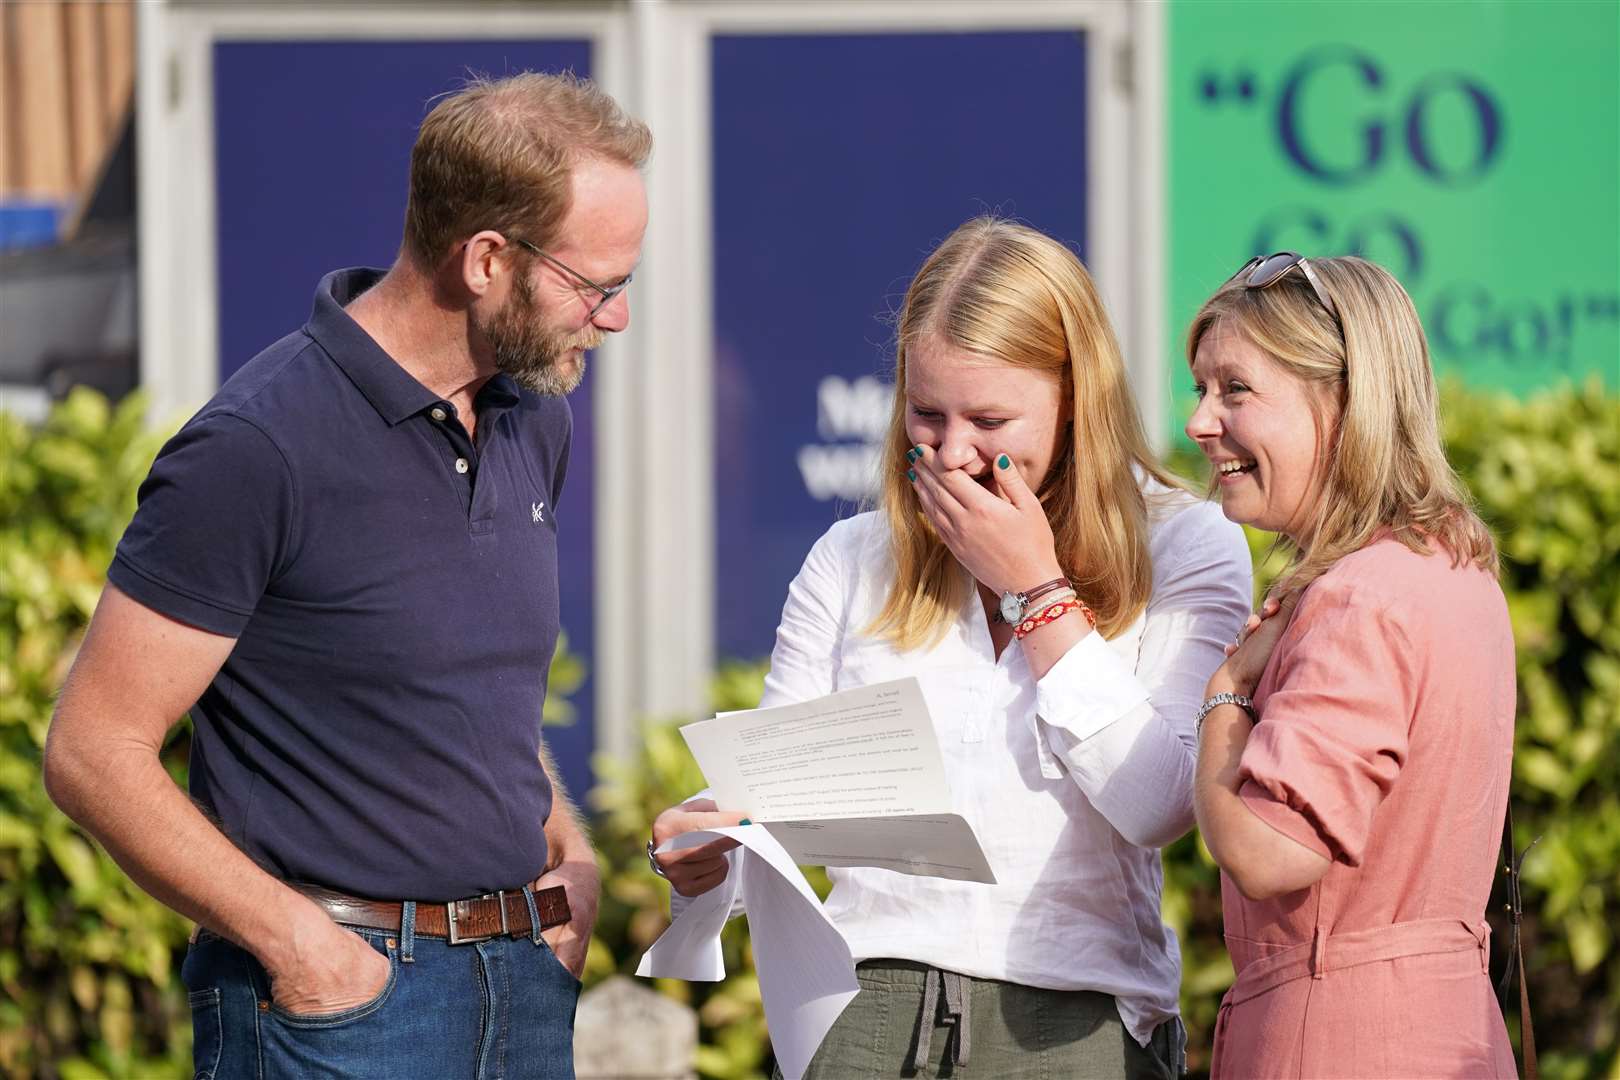 Head of school Millie Clark collects her A-level results at Norwich School (Joe Giddens/PA)